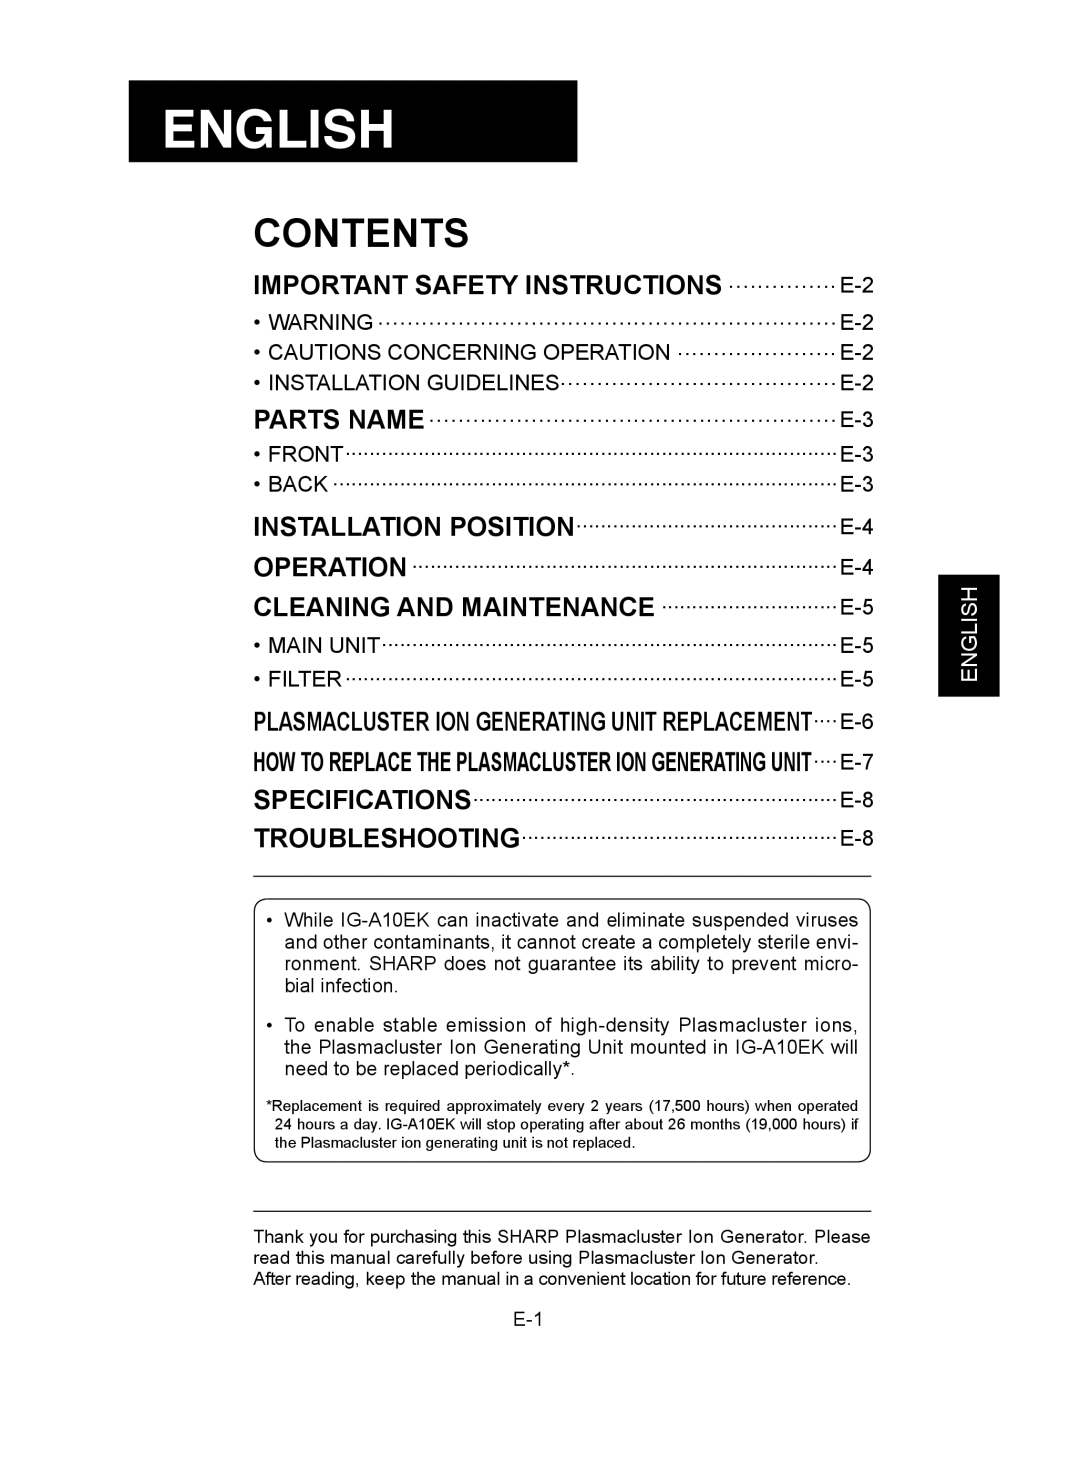 Sharp IG-A10EK operation manual IMPORTANT SAFETY INSTRUCTIONS................E-2, English, Contents 